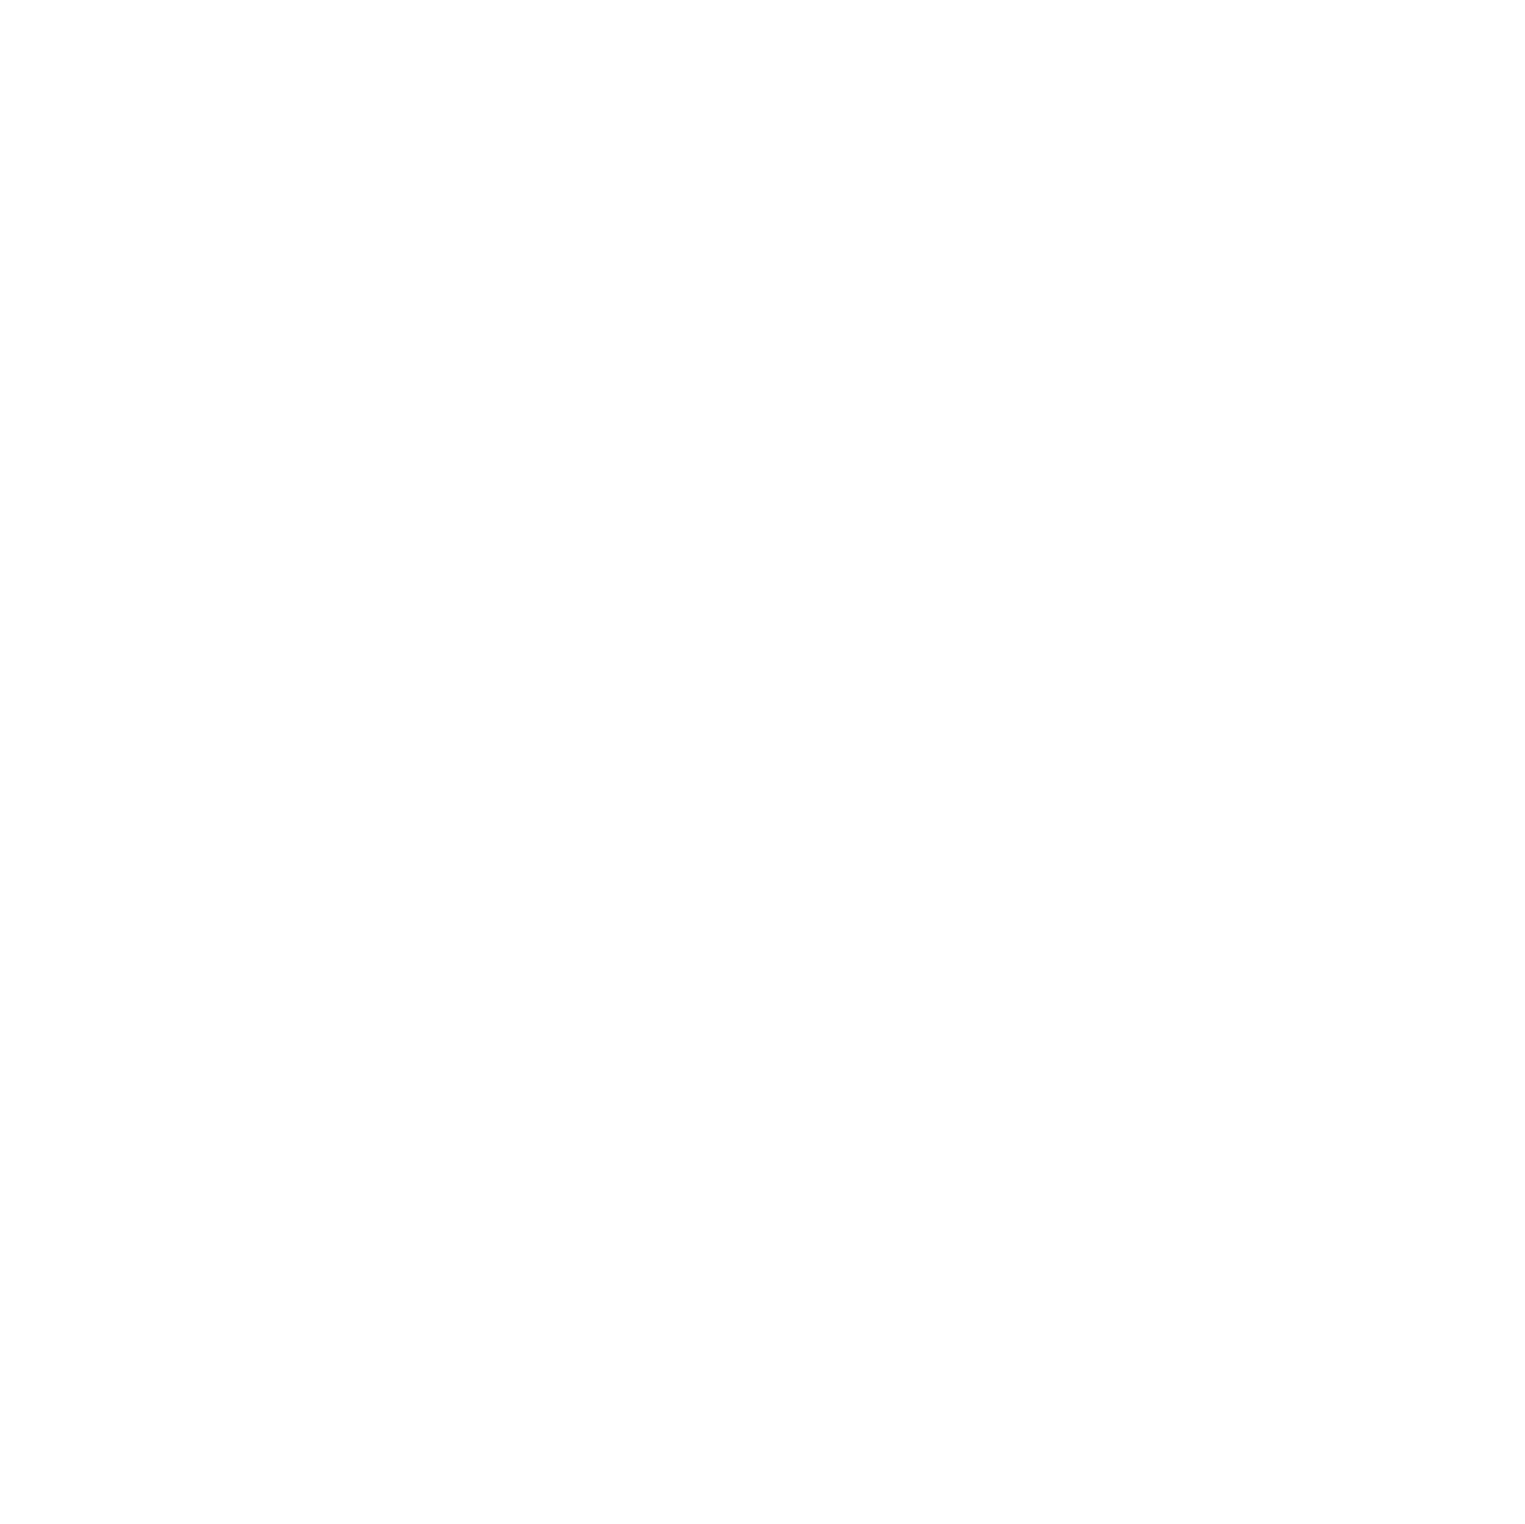 Roblox logo in transparent PNG and vectorized SVG formats